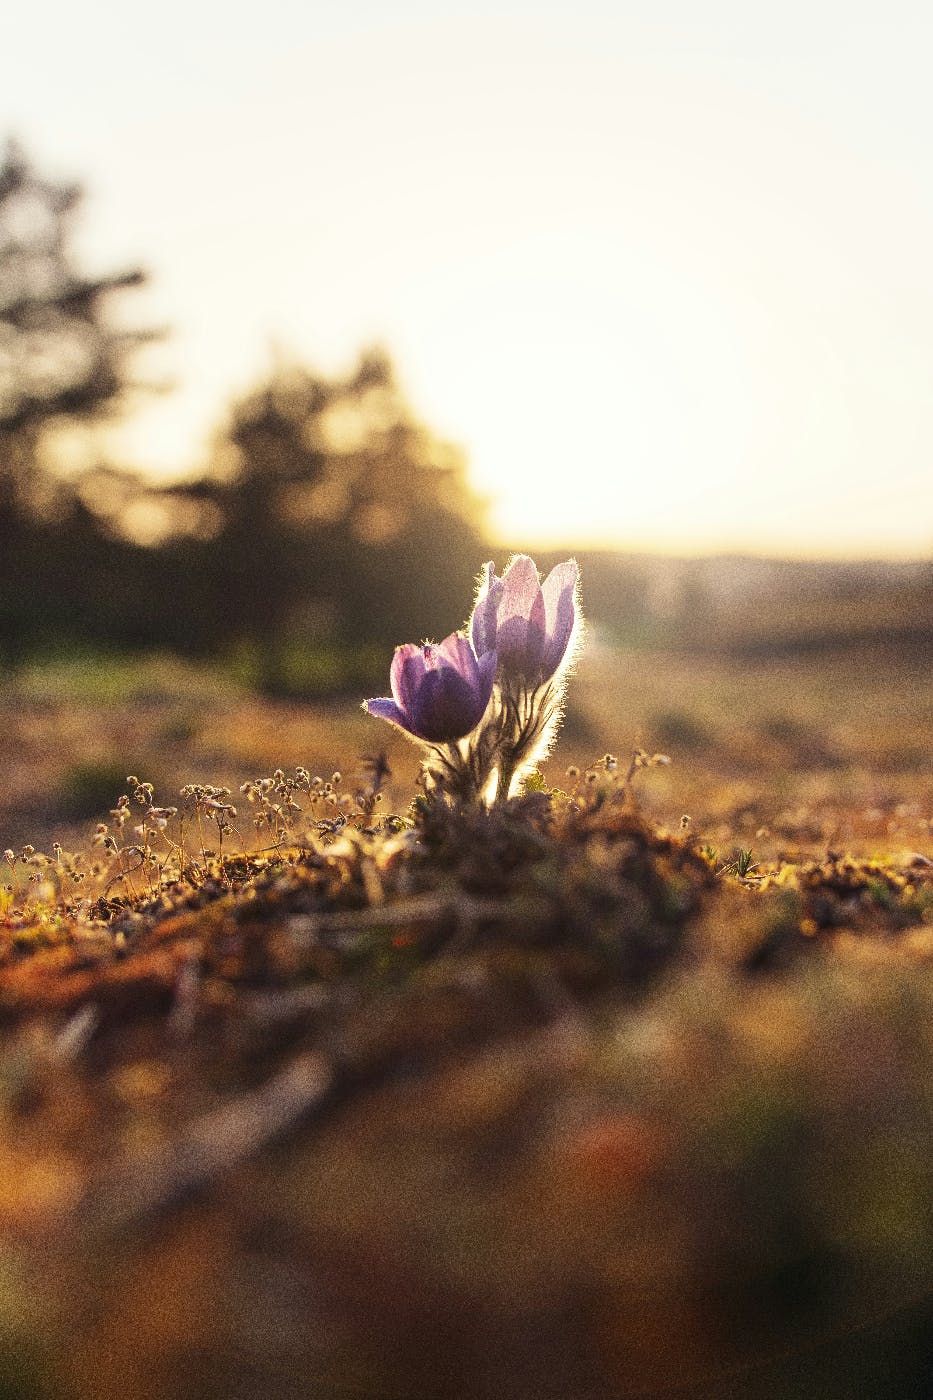 Two small purple tulips poking above the dirt